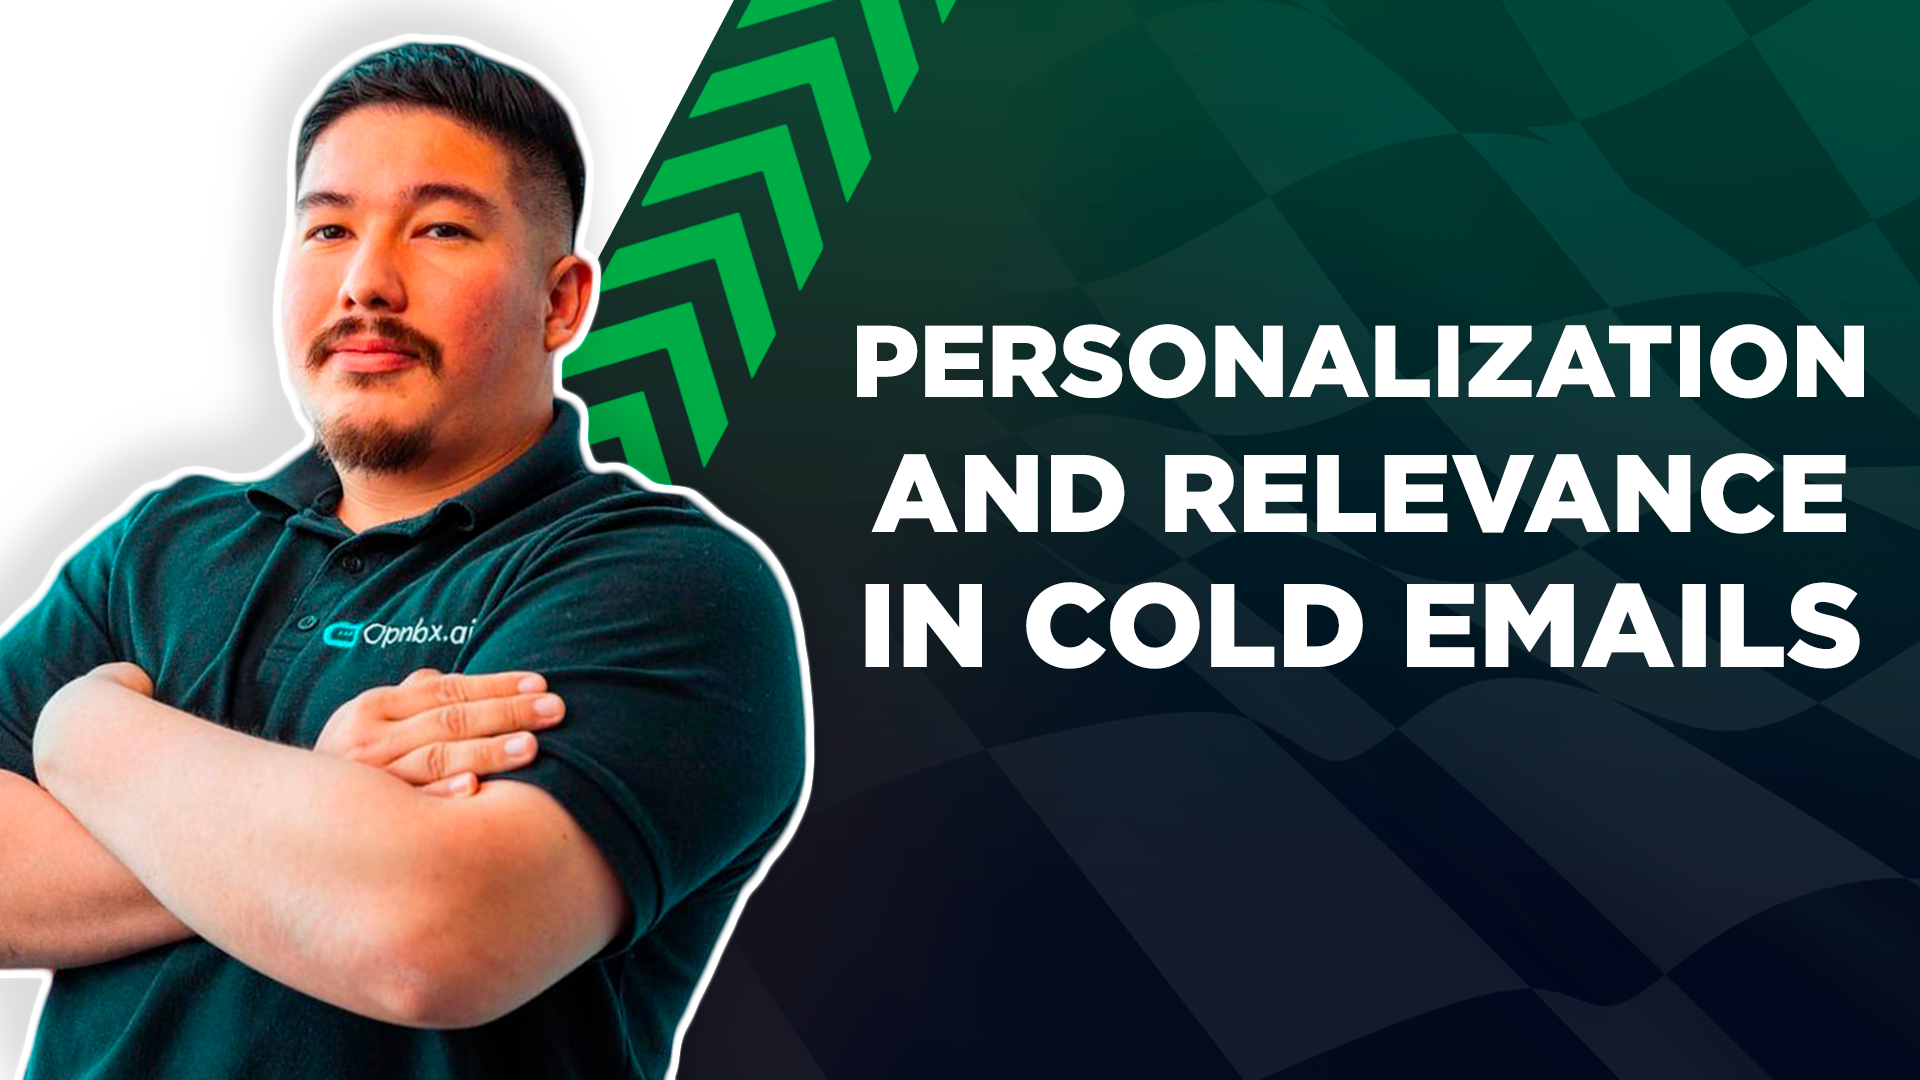 Podcast Pit Stop: George Suarez on Personalization and Relevance in Cold Emails